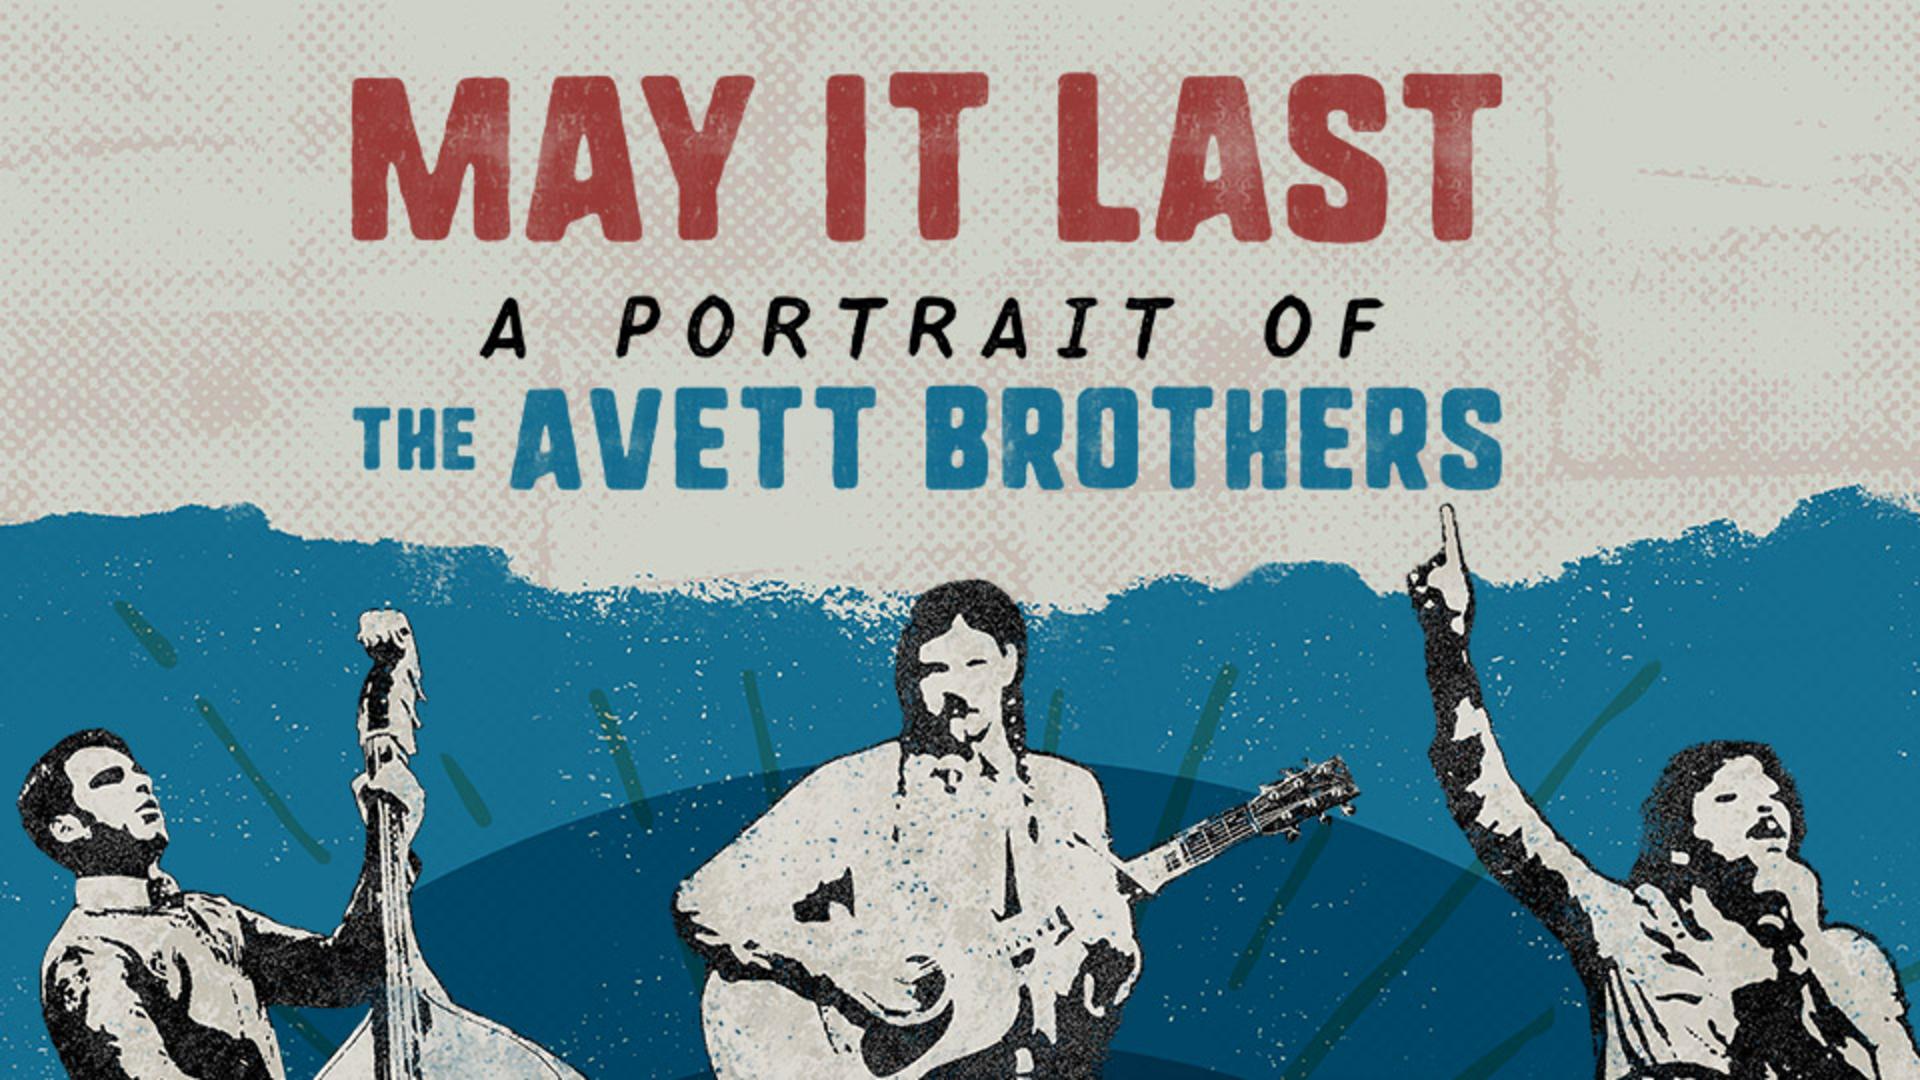 MAY IT LAST: A PORTRAIT OF THE AVETT BROTHERS